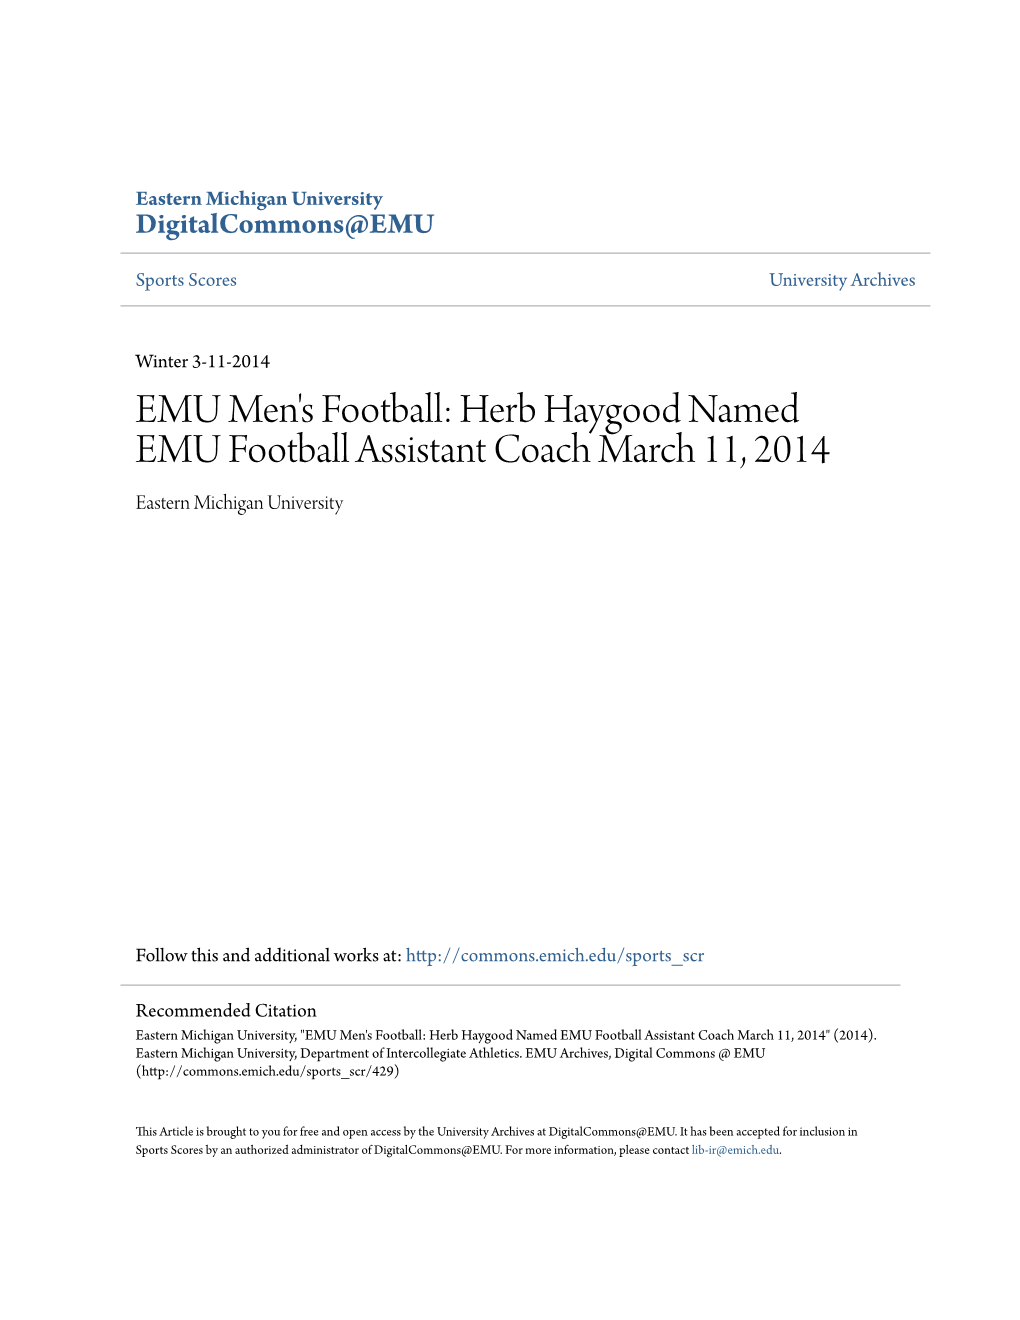 Herb Haygood Named EMU Football Assistant Coach March 11, 2014 Eastern Michigan University